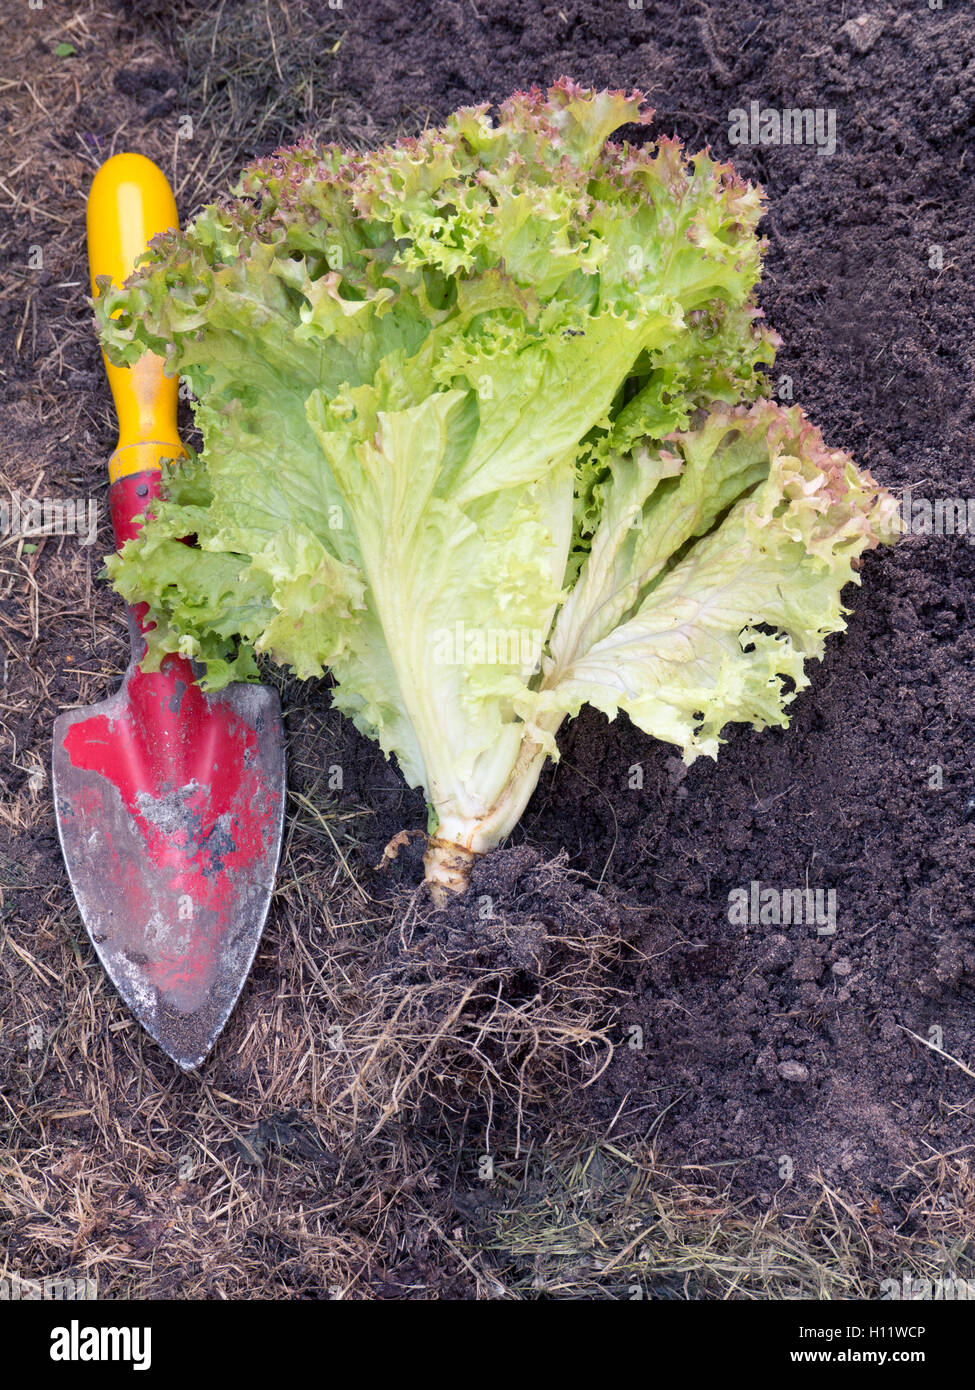 Lollo rosso salad and small old red shovel on the ground Stock Photo